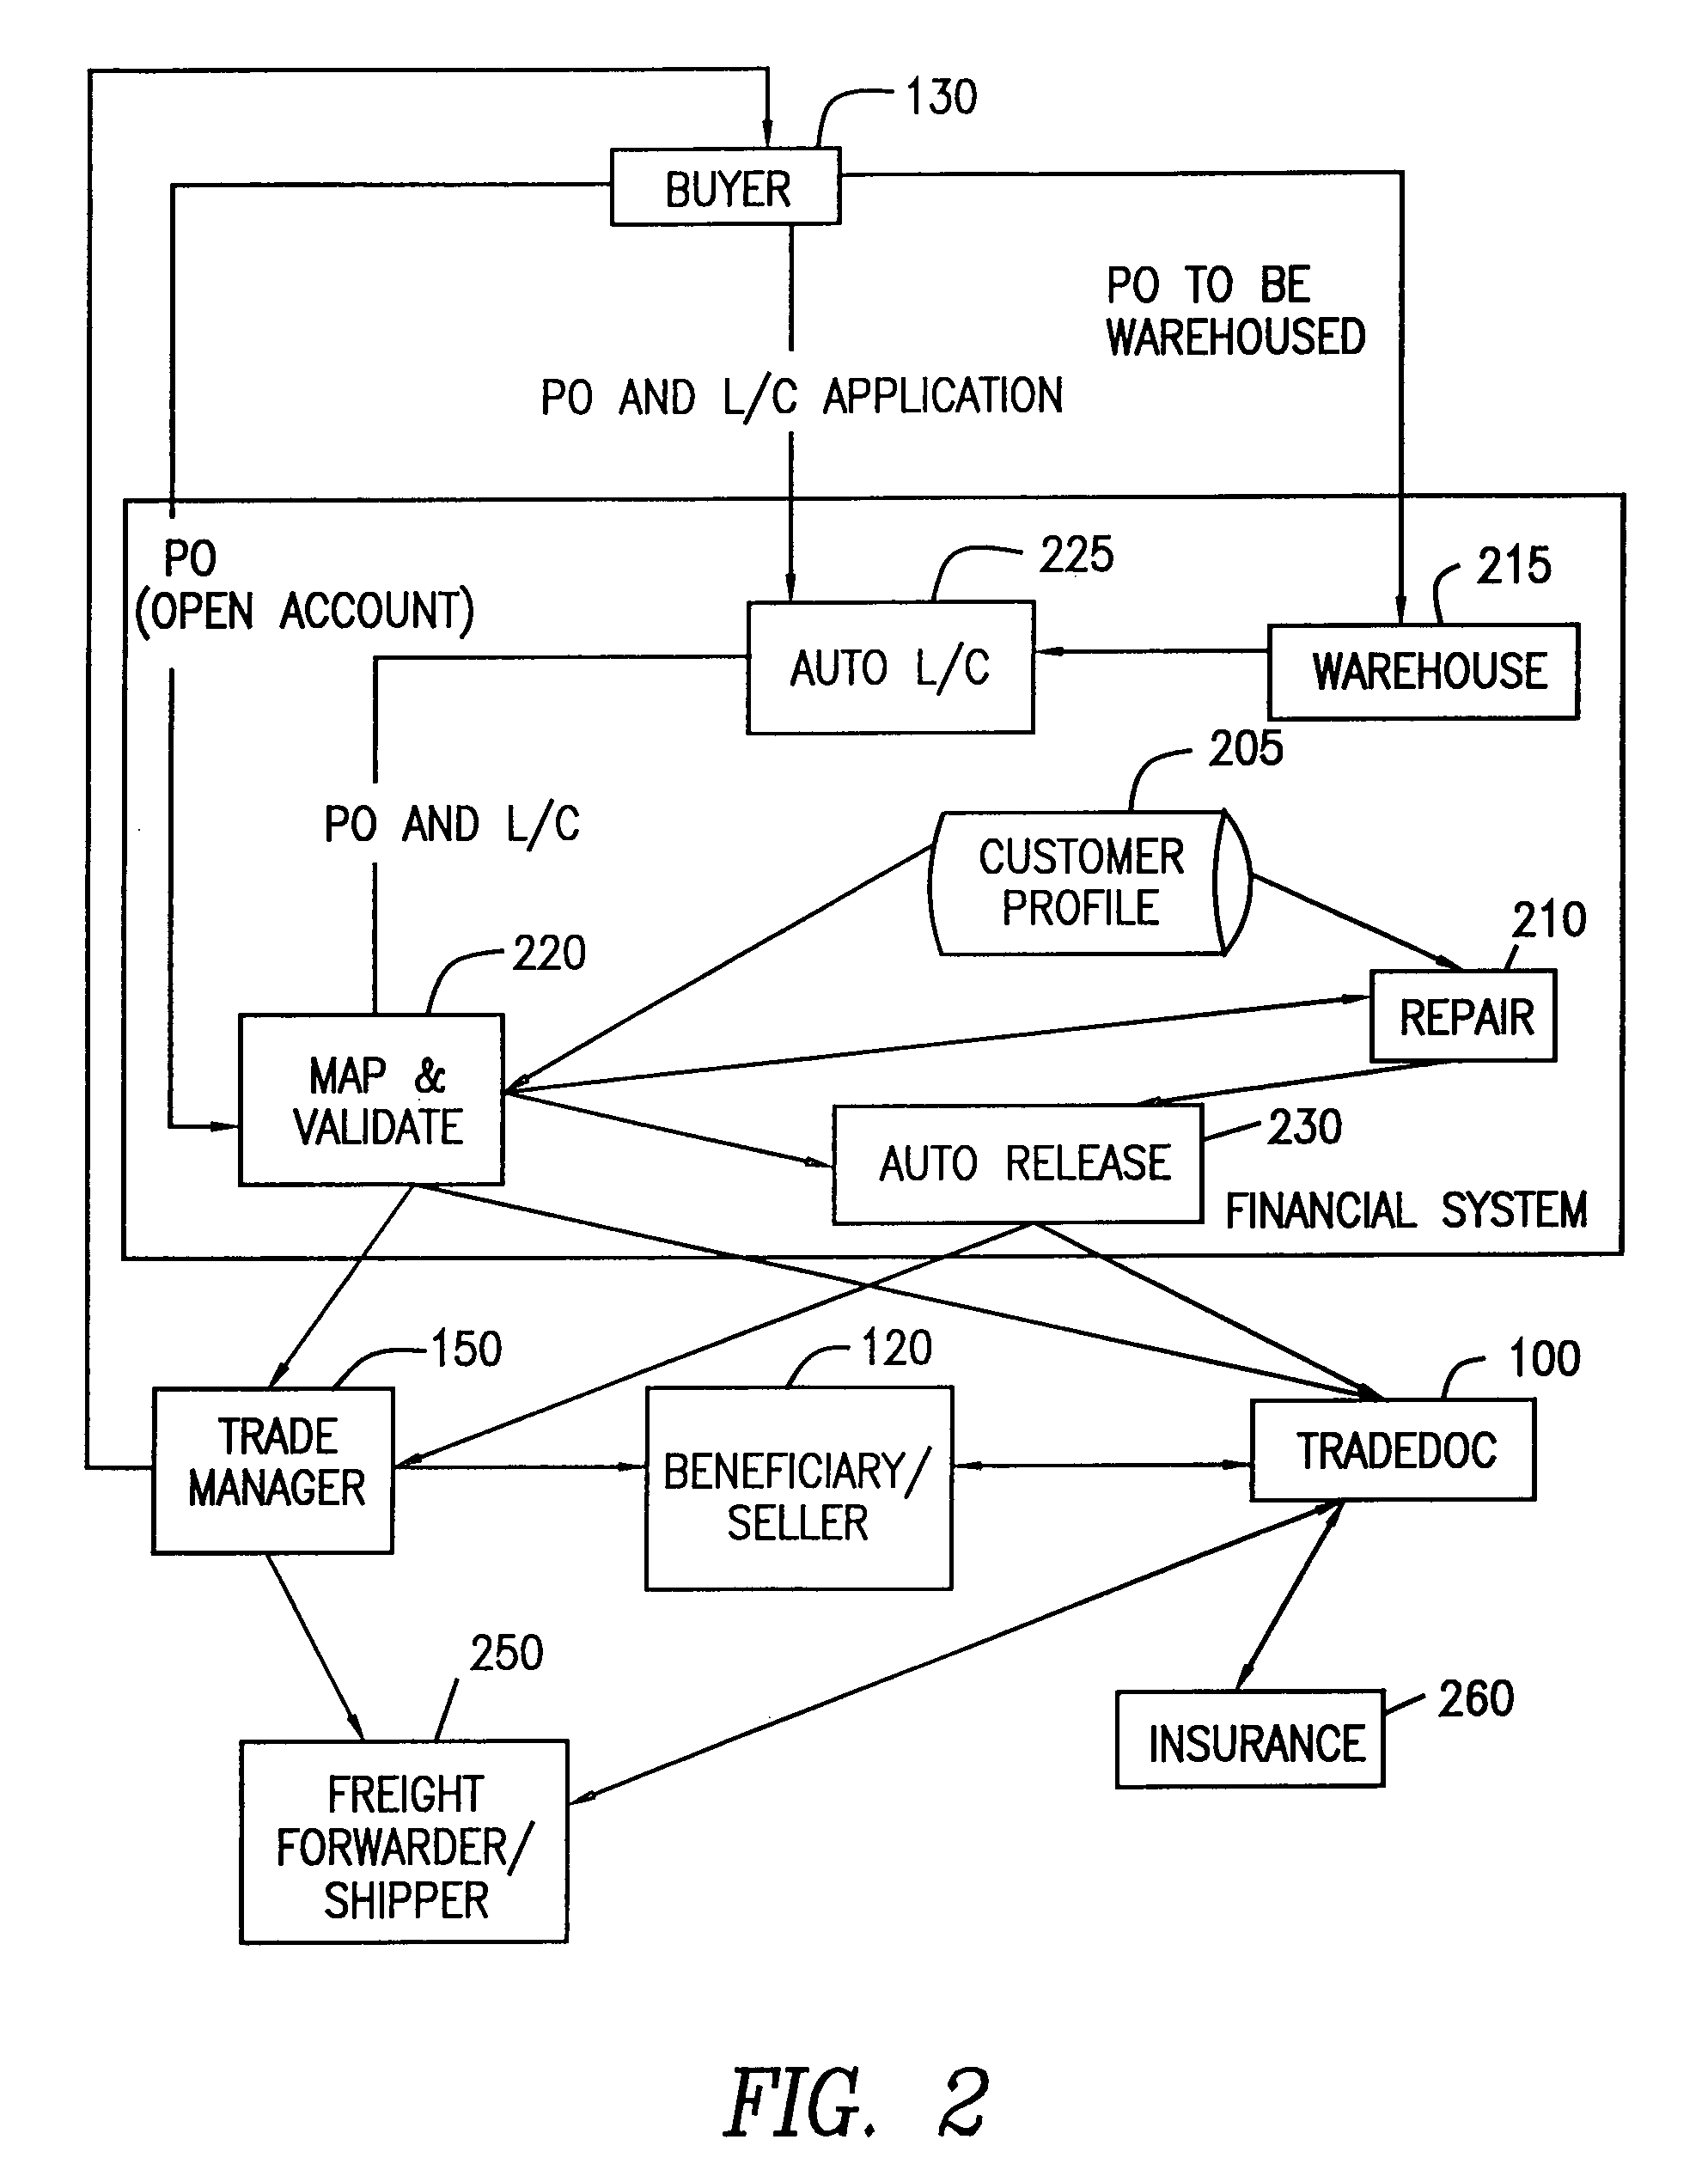 System and method for integrating trading operations including the generation, processing and tracking of and trade documents